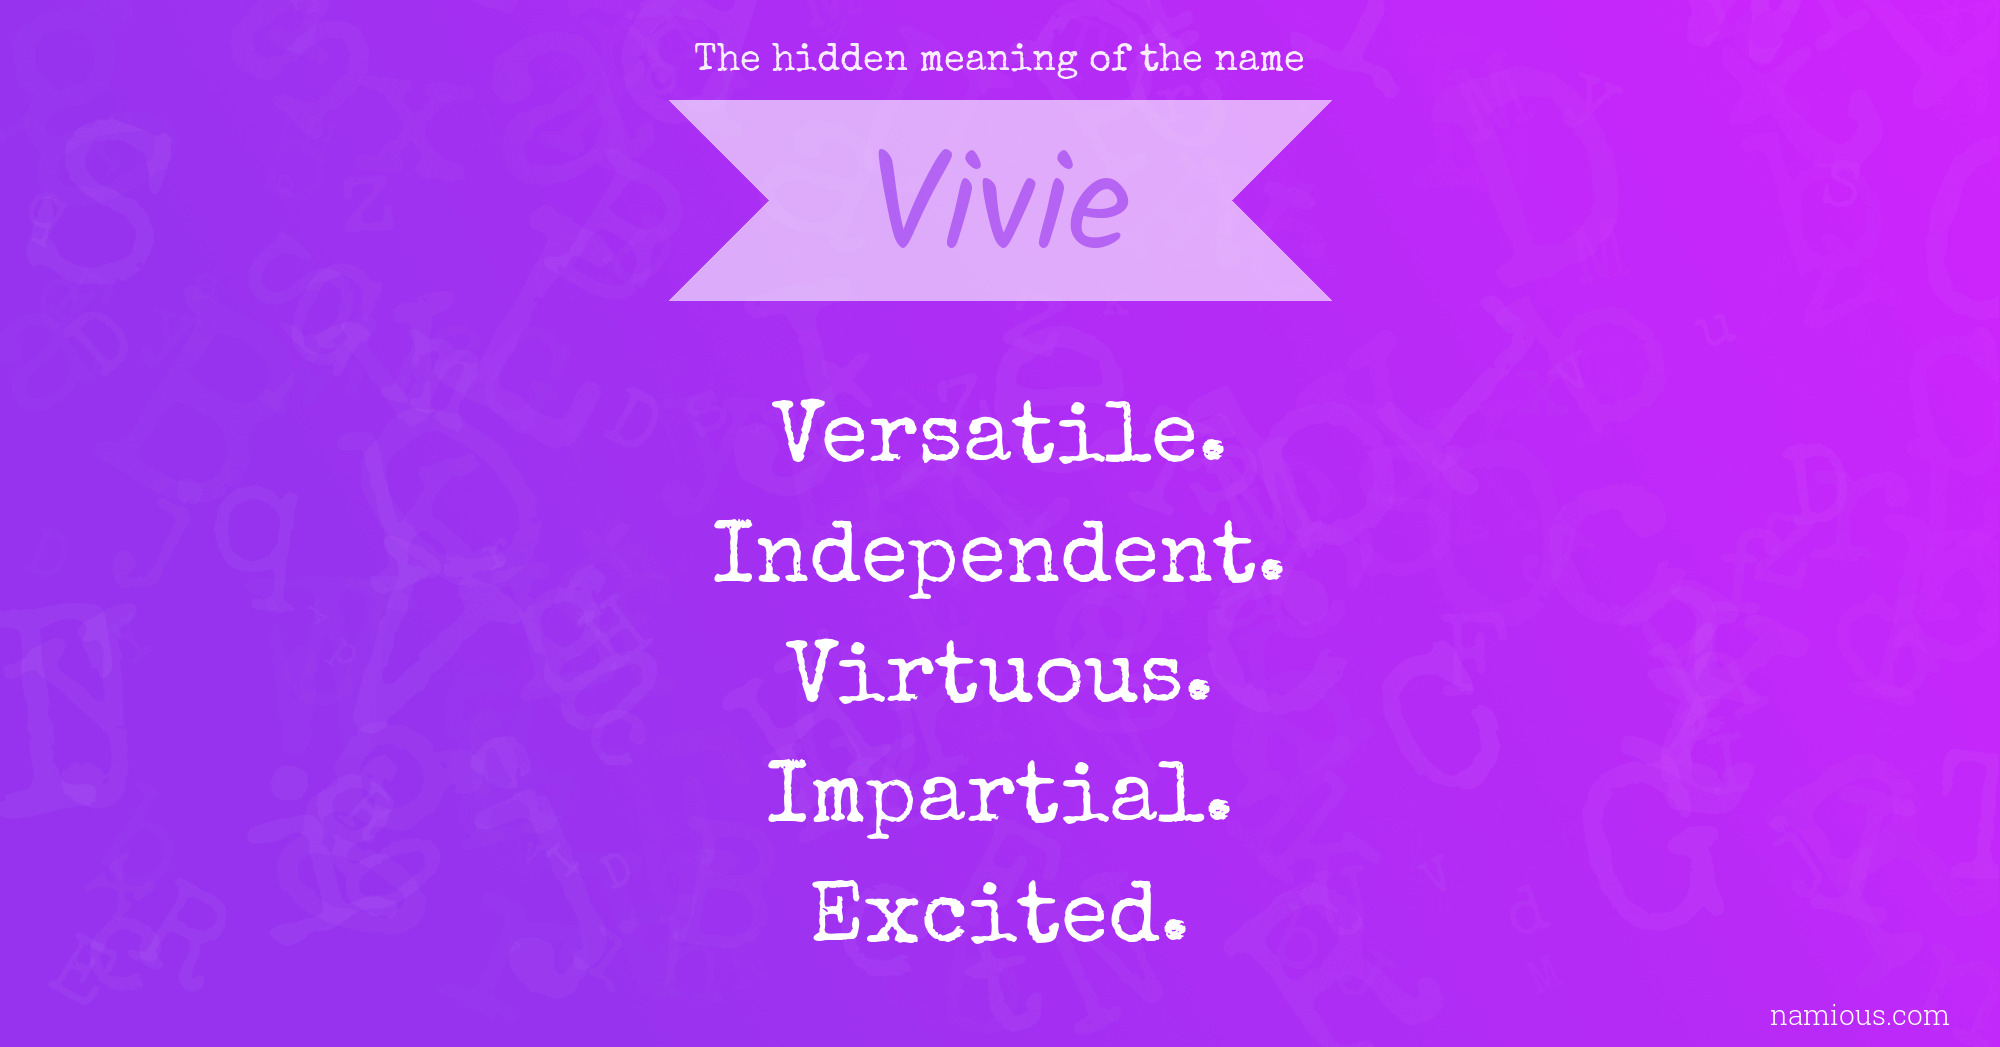 The hidden meaning of the name Vivie